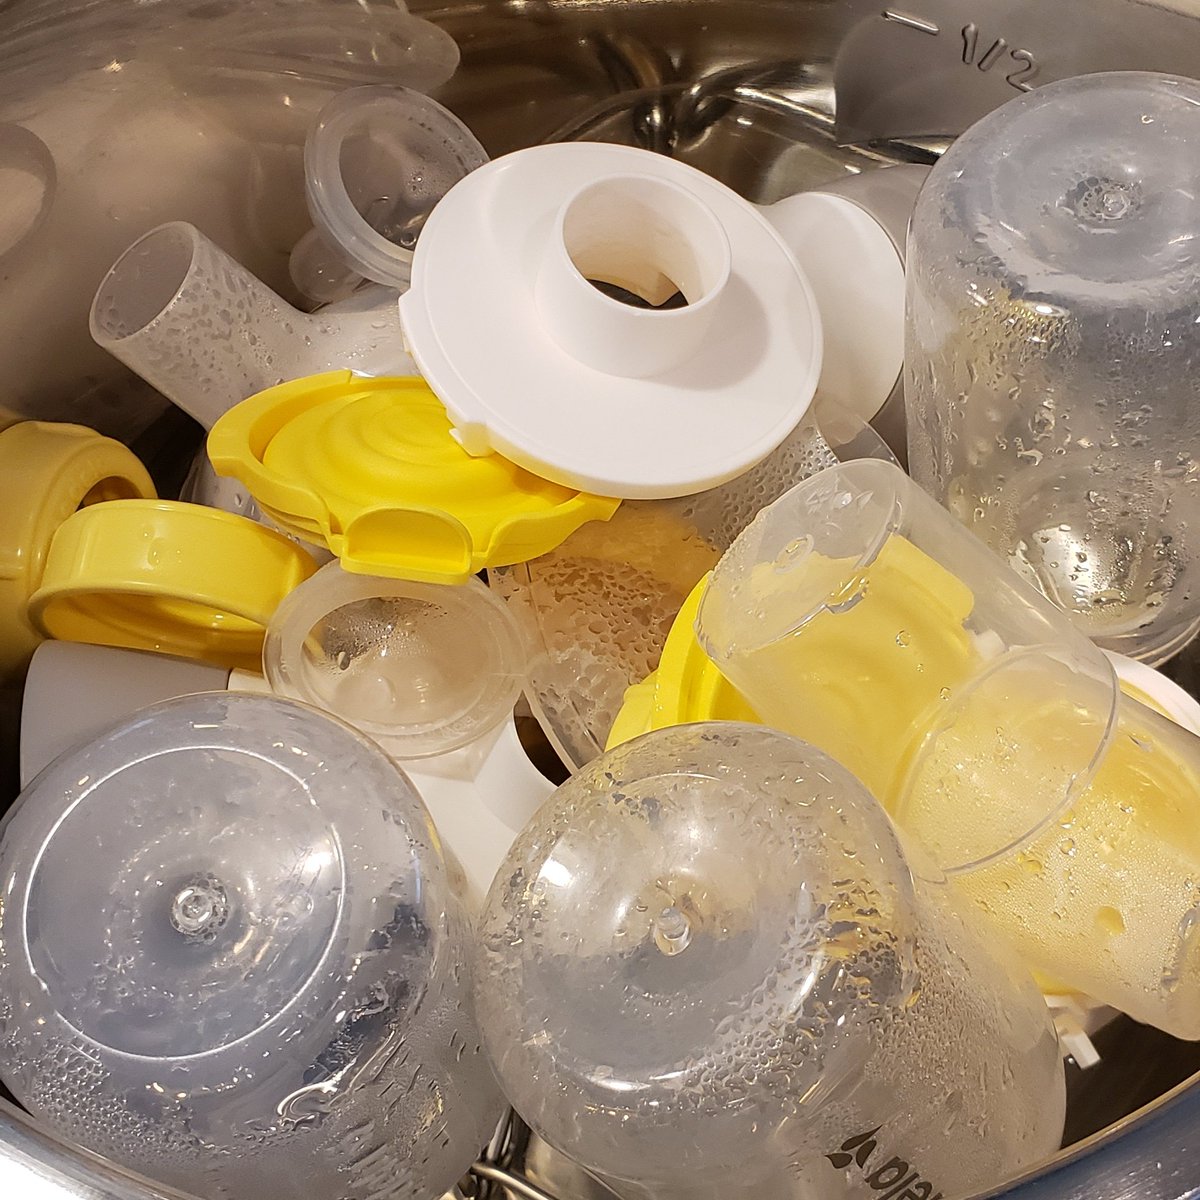 #DidYouKnow you can use an instant pot to sterilize bottles and breast pump parts? Just pop them in with the metal rack and an inch of water, 3 min on the Sterlize setting. Follow me for more #parentinghacks.

(Not really. I don't have hacks. I'm still winging it three kids in.)